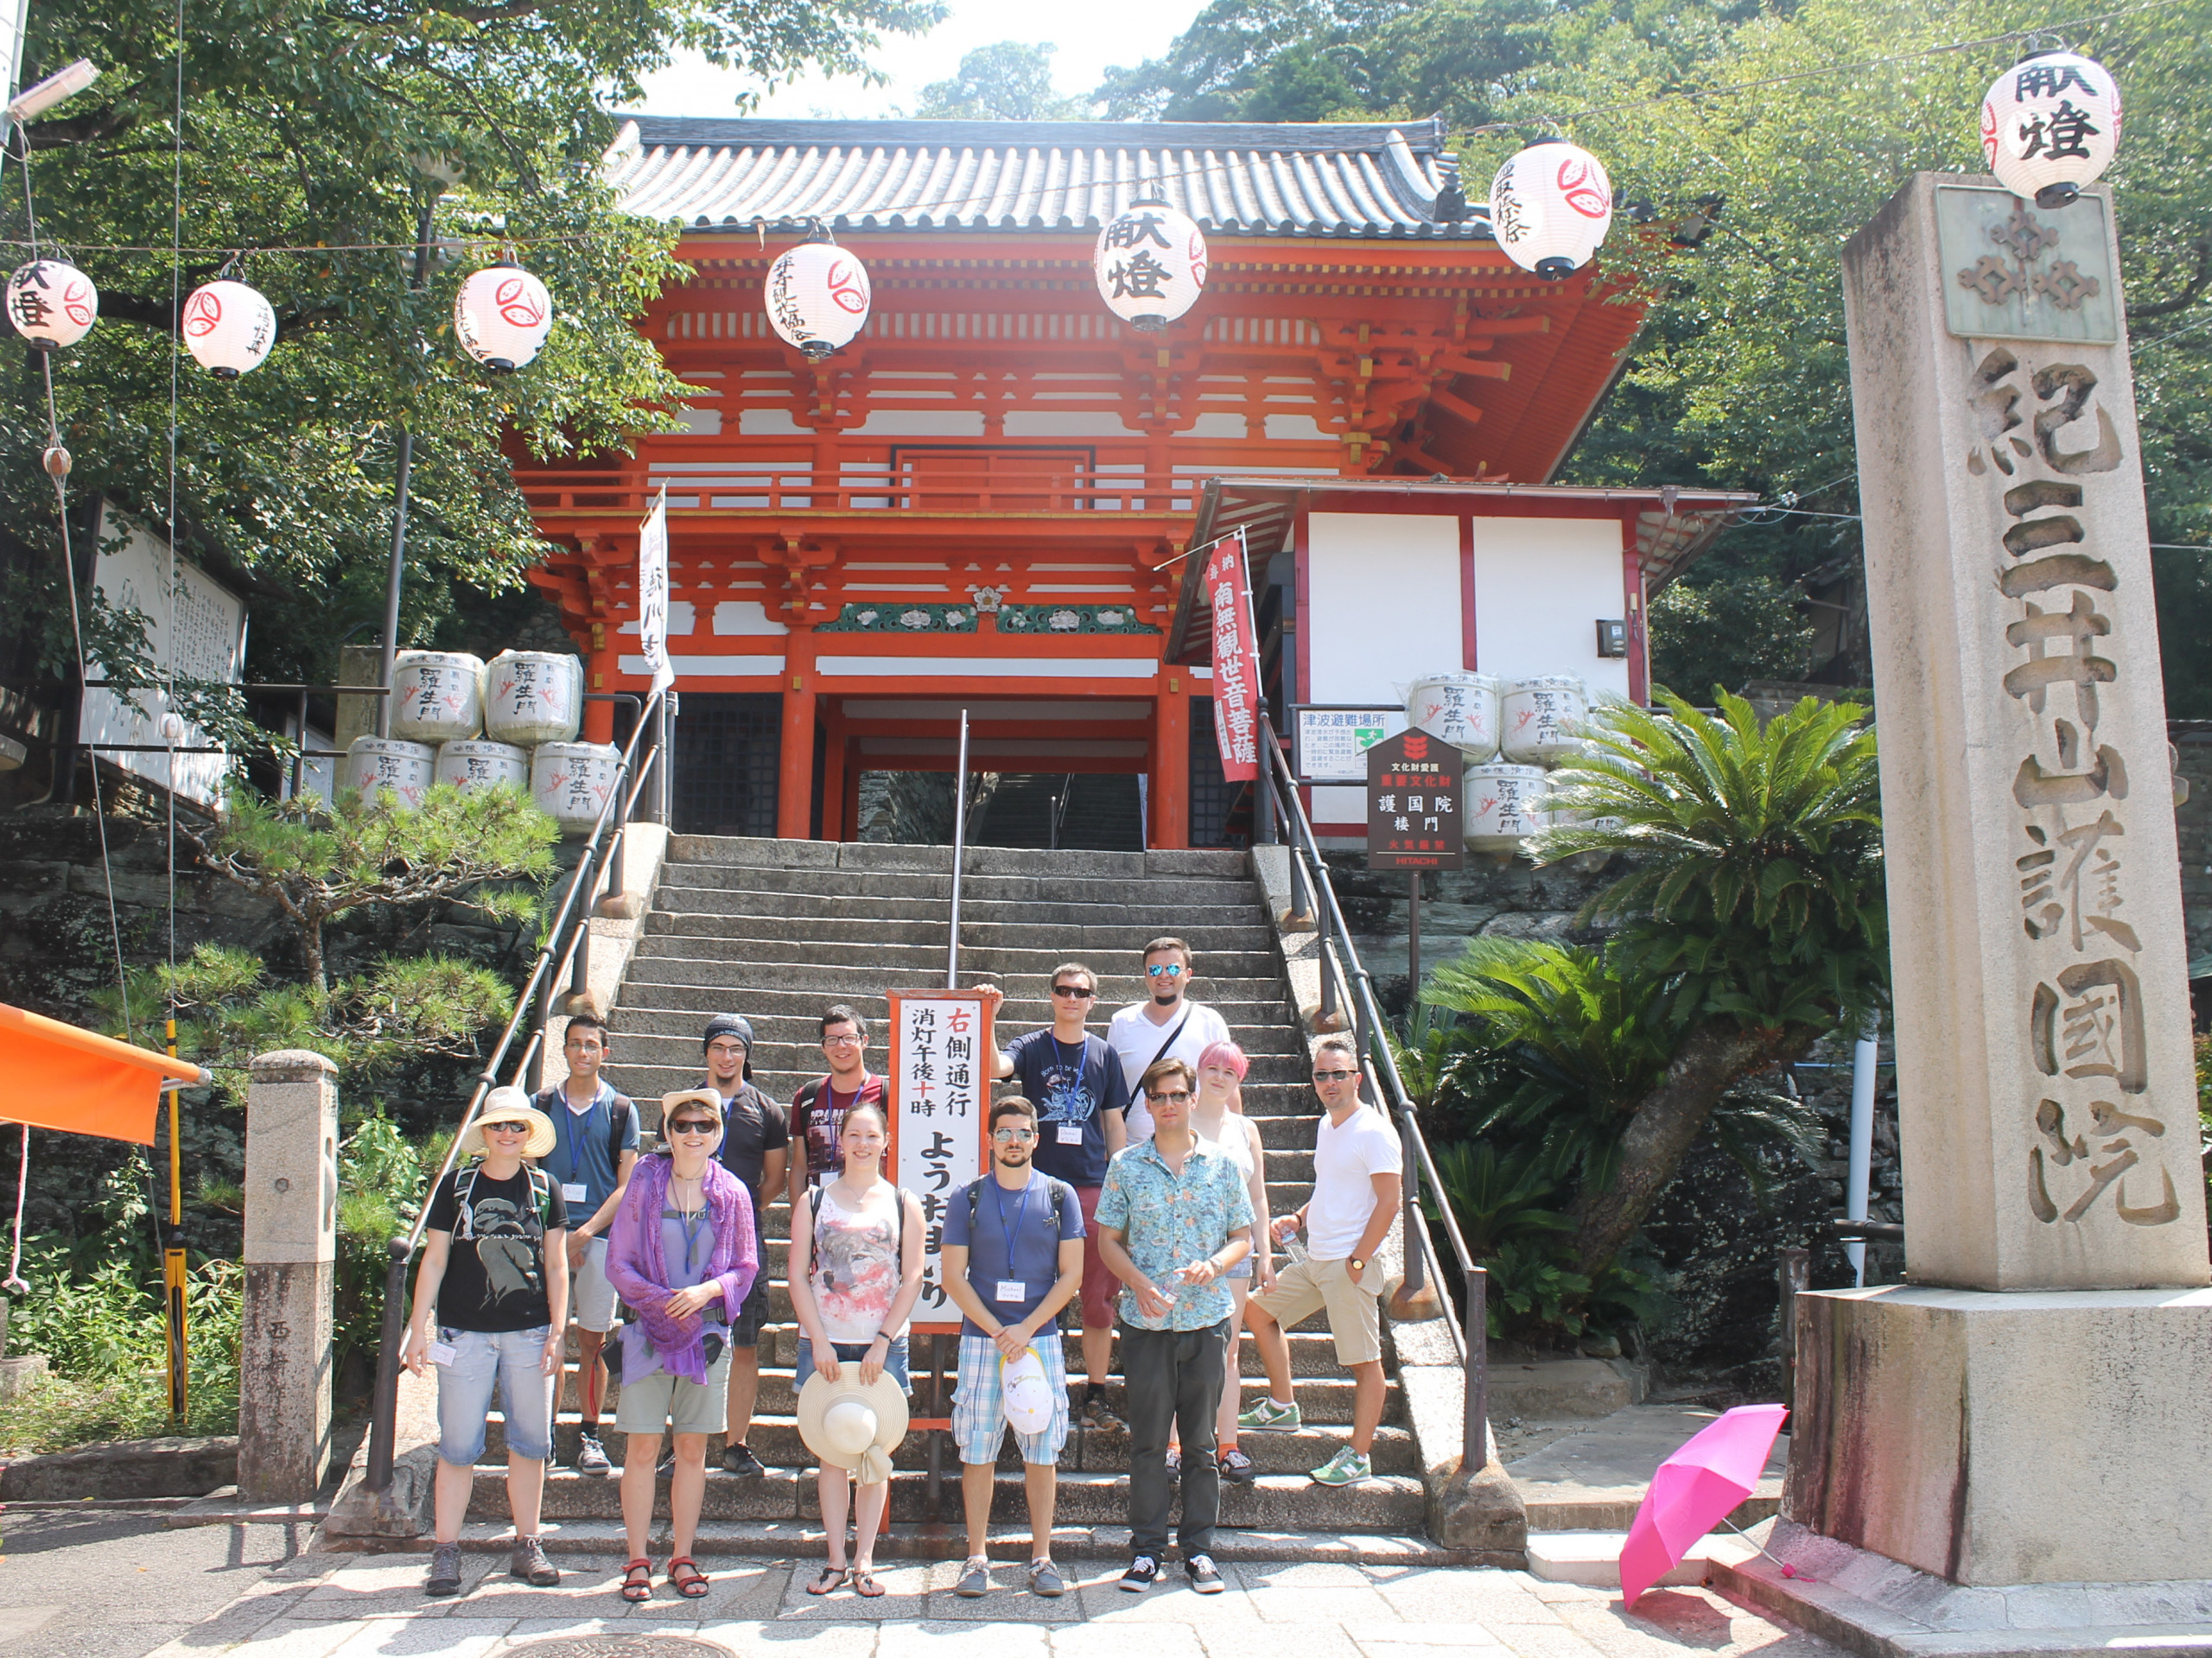 Teenagers from Austria in Japan. The group stands in front of a Japanese temple entrance.